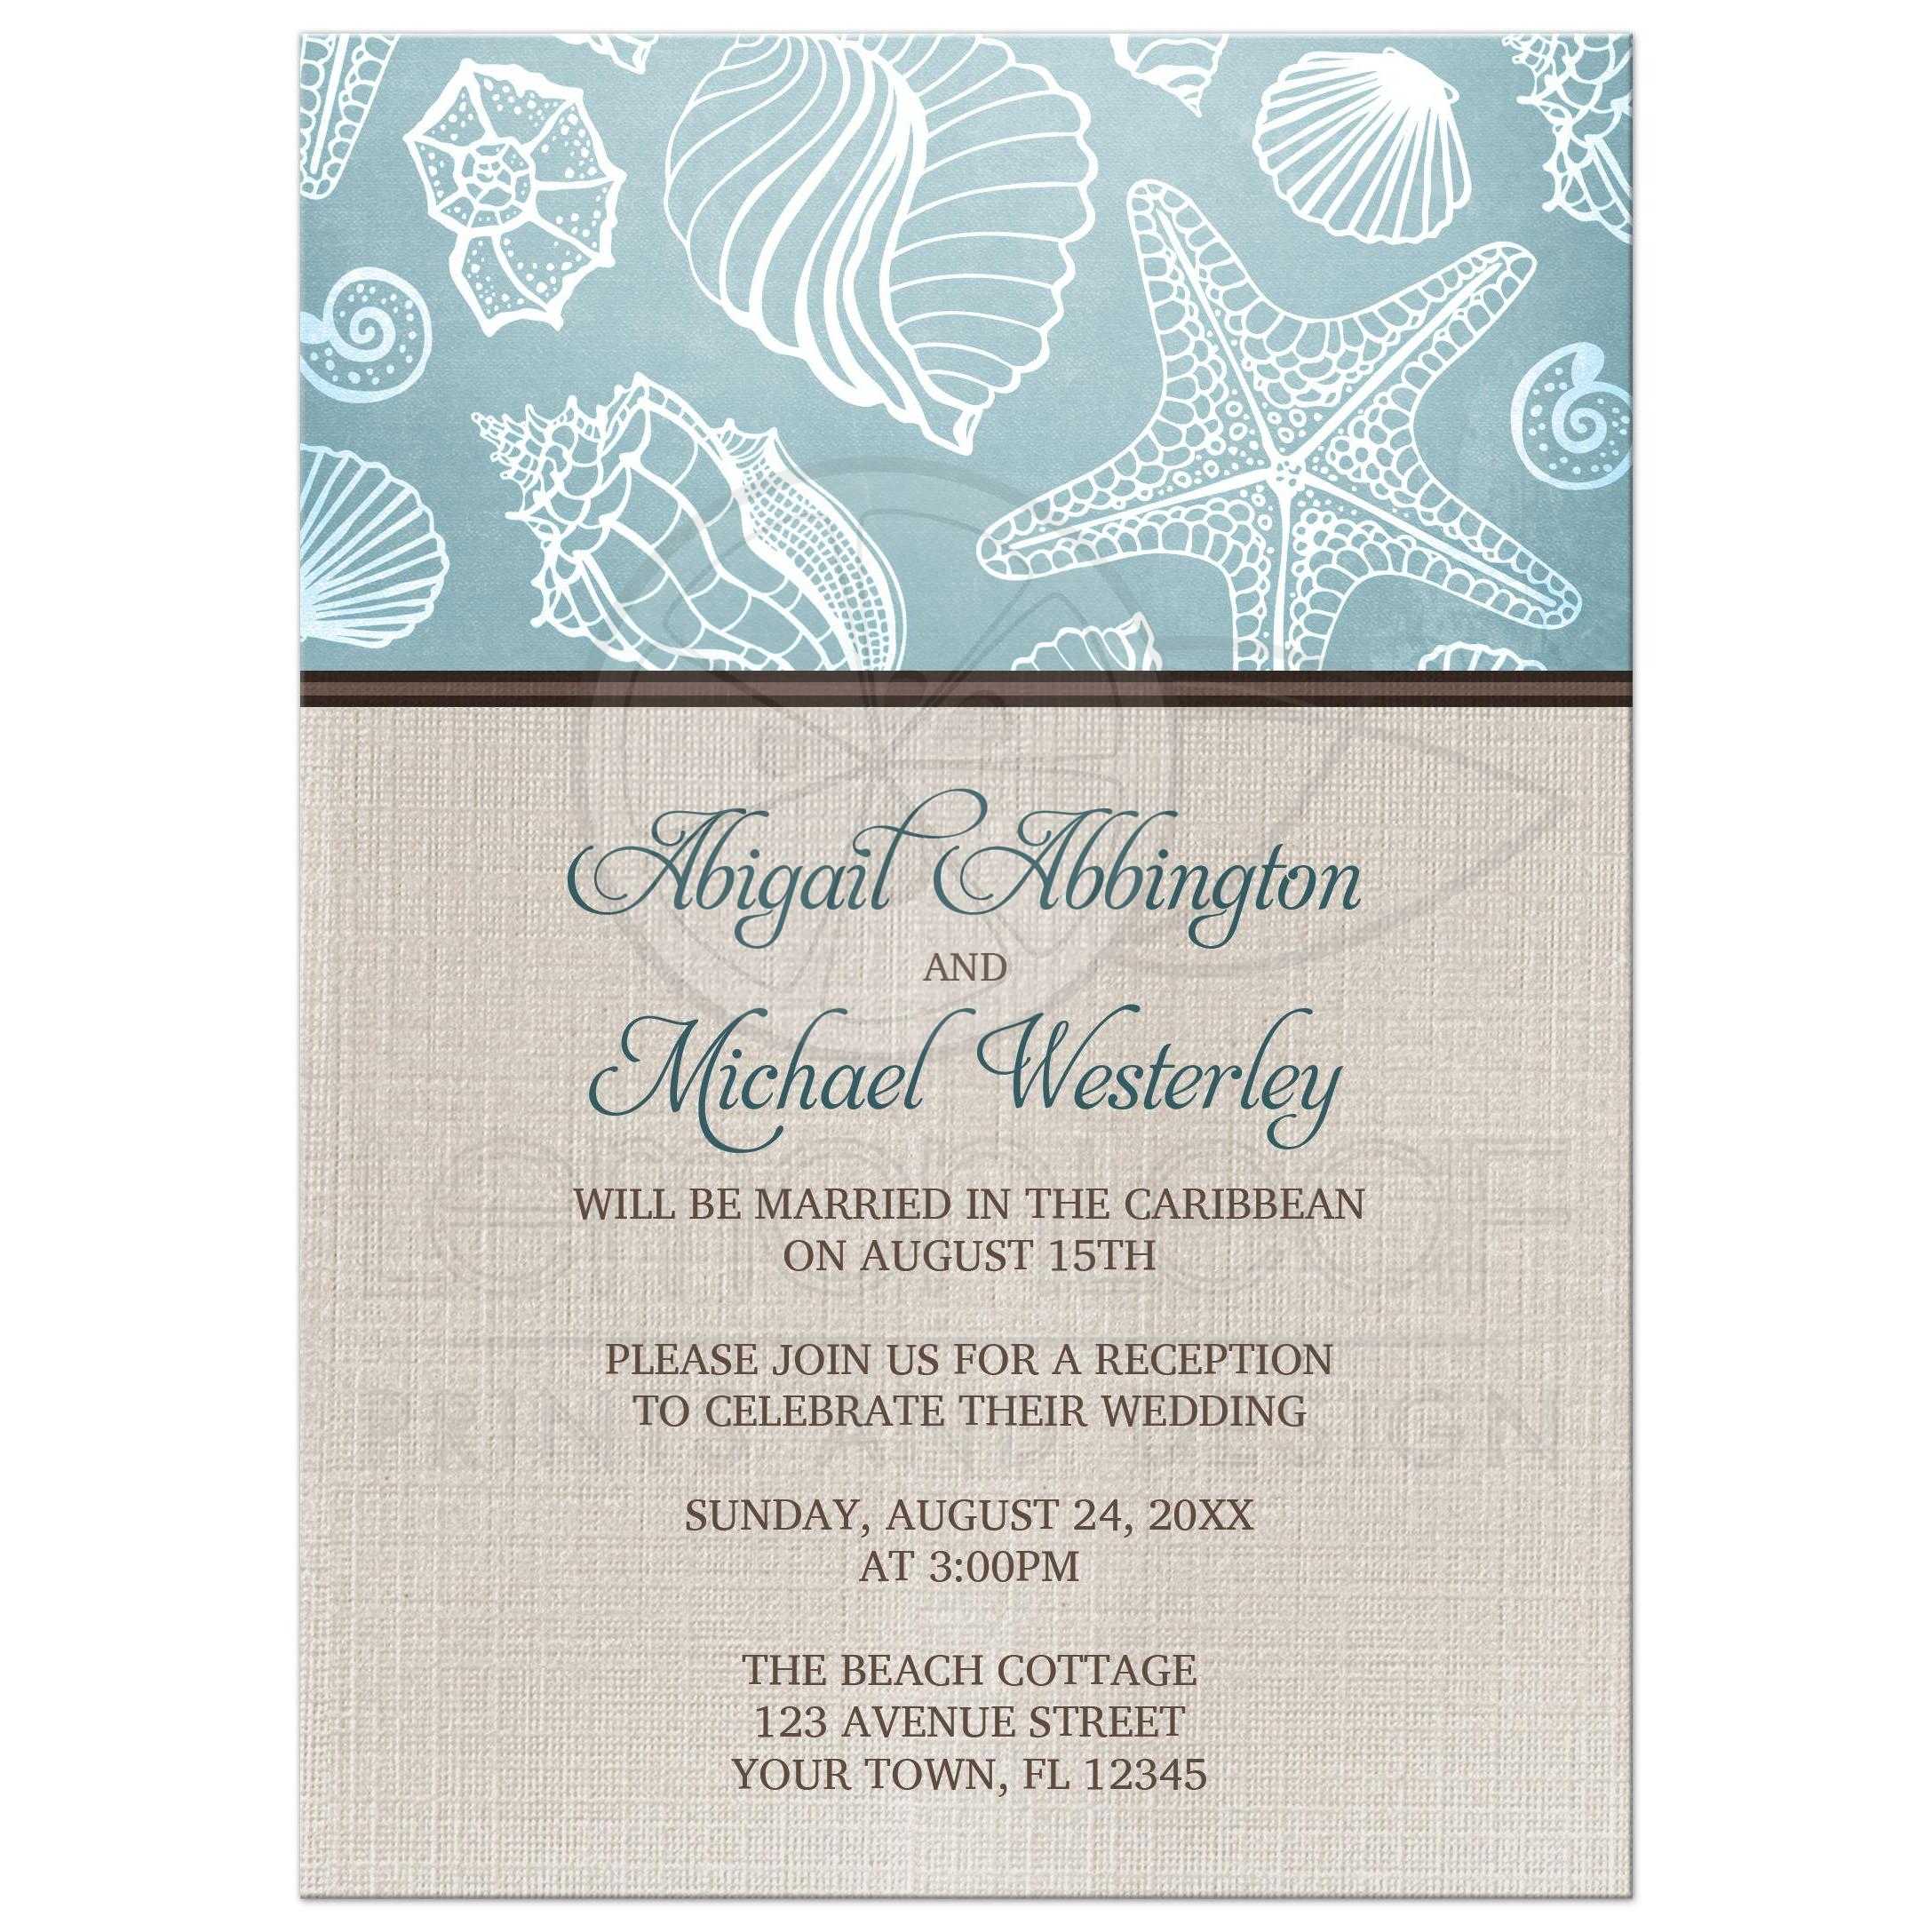 Reception Only Invitations